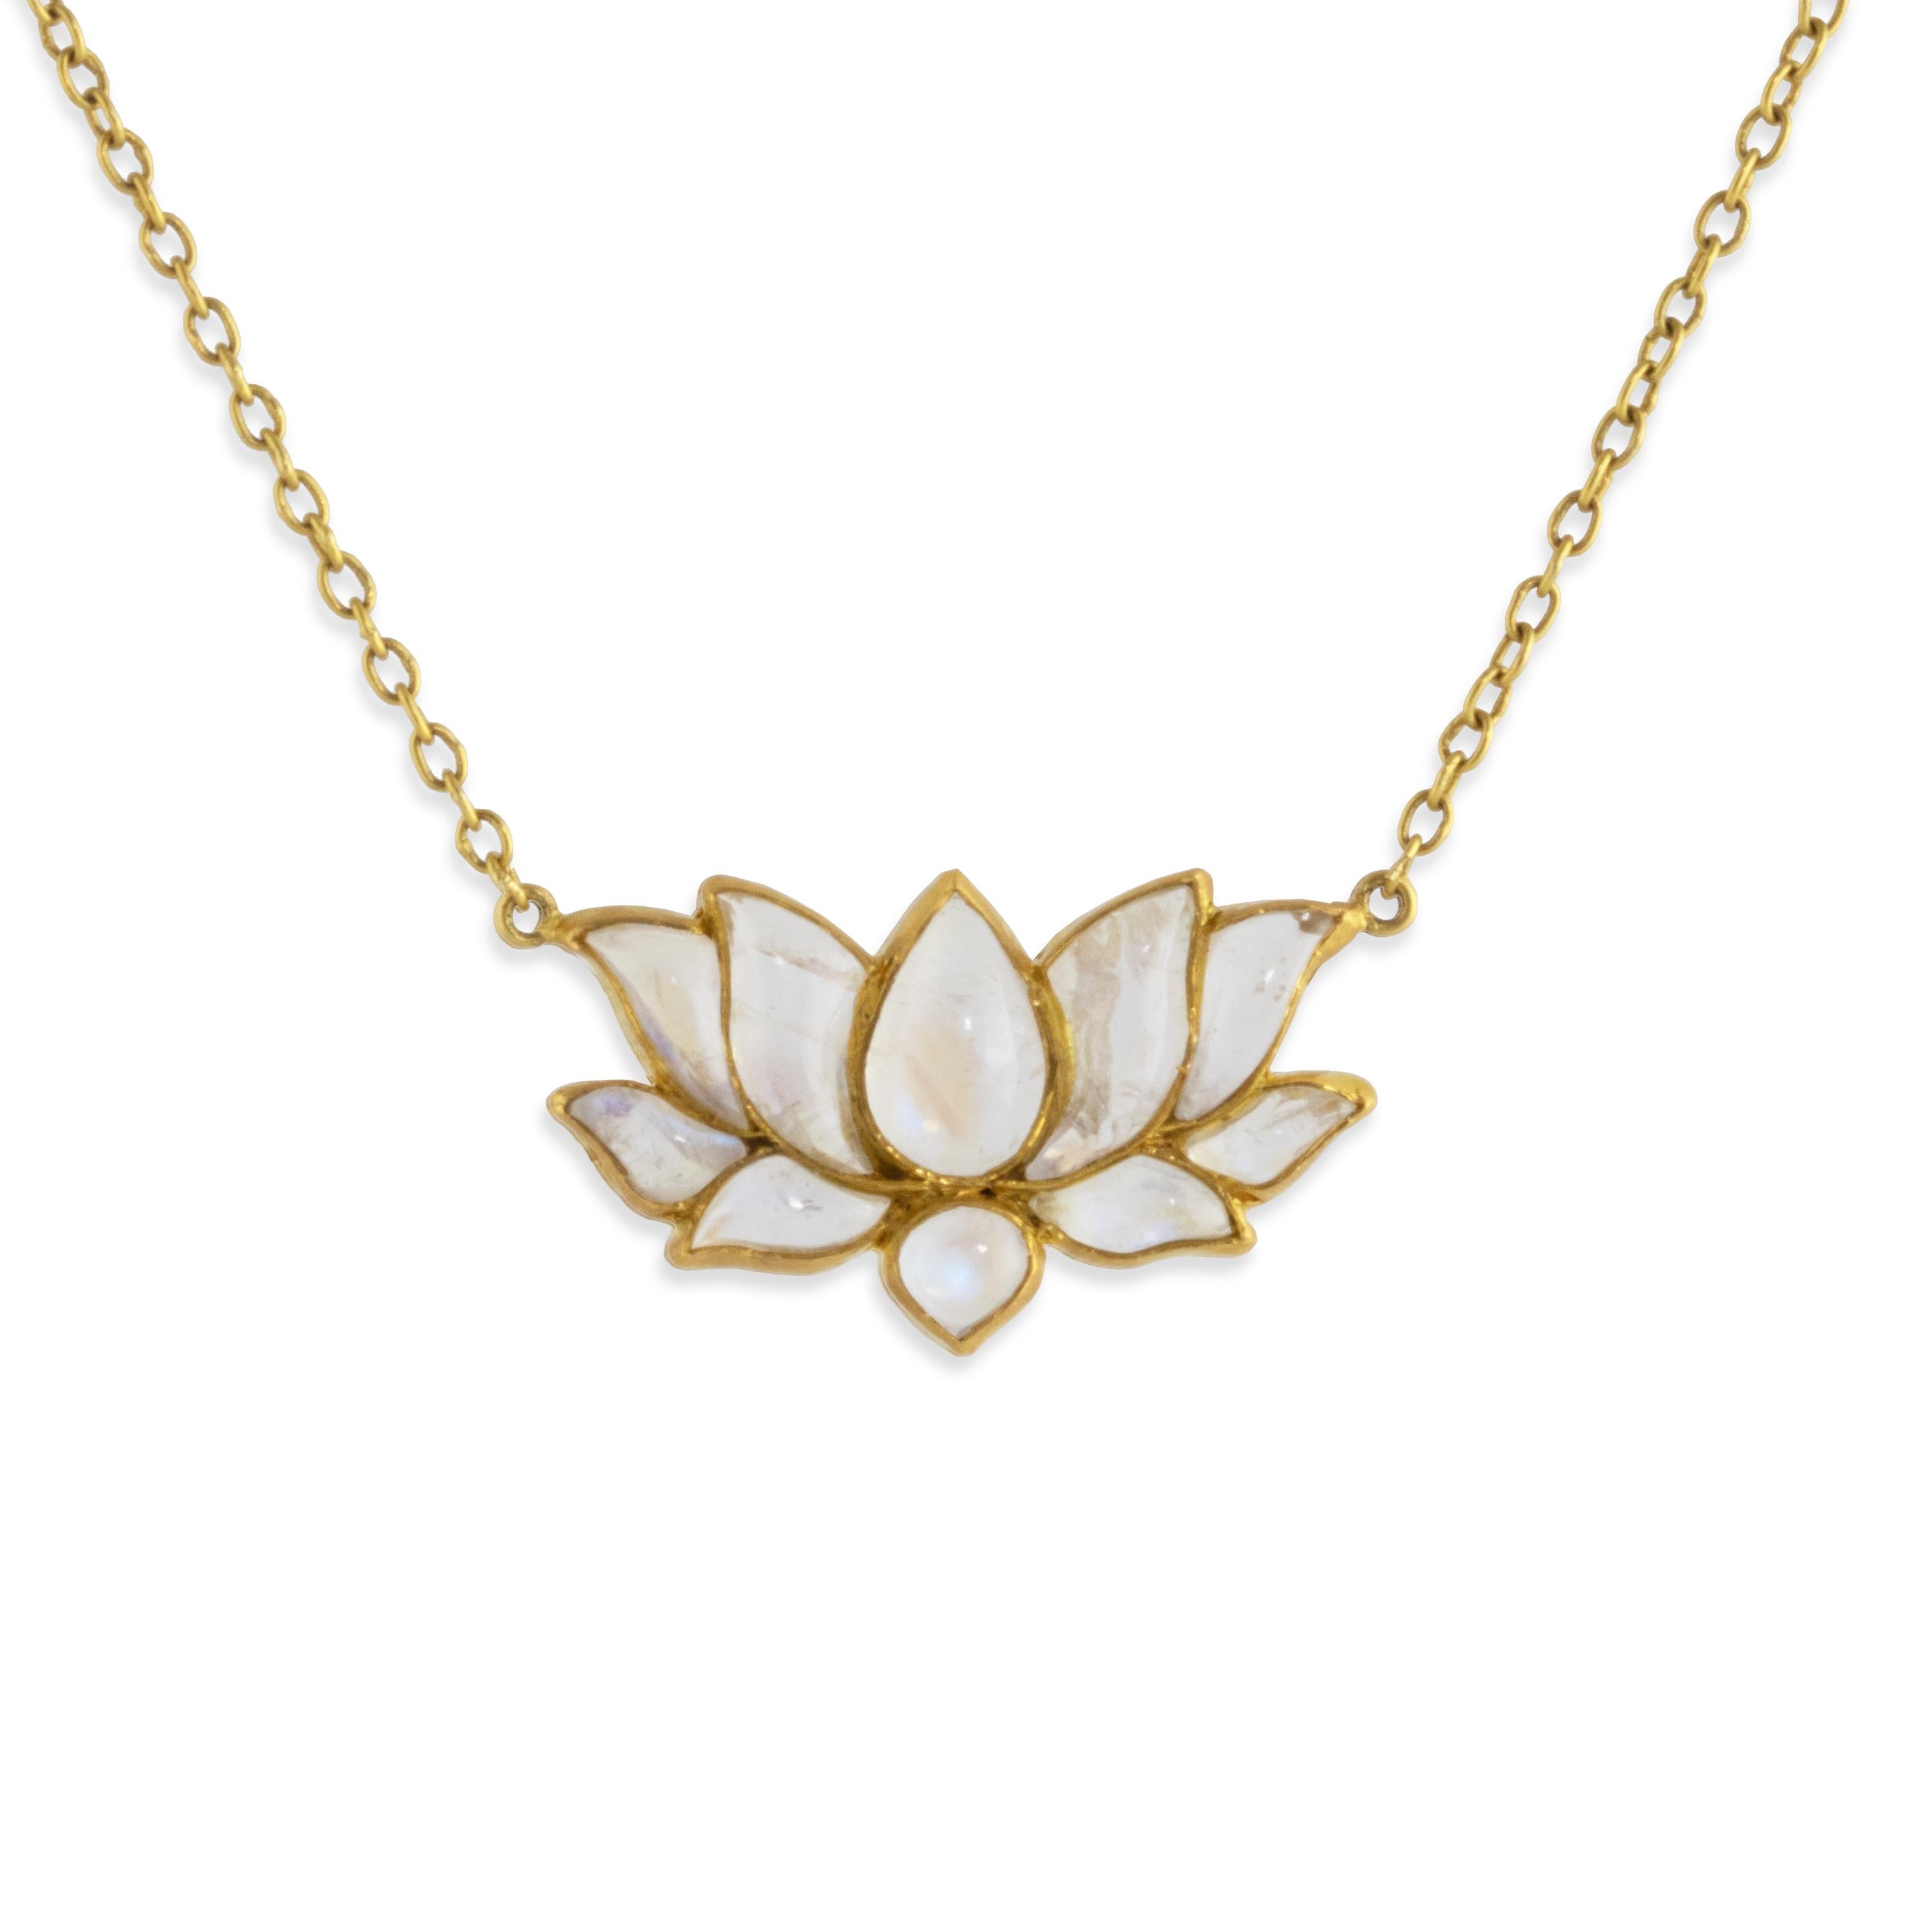 A spectacular Lotus necklace featuring a center lotus drop surrounded by multiple petals carved in Rainbow Moonstone cabochons. The pieces are set like an open blossom mosaic pattern in 22k gold. The piece is finished with a 22k hand-made gold chain